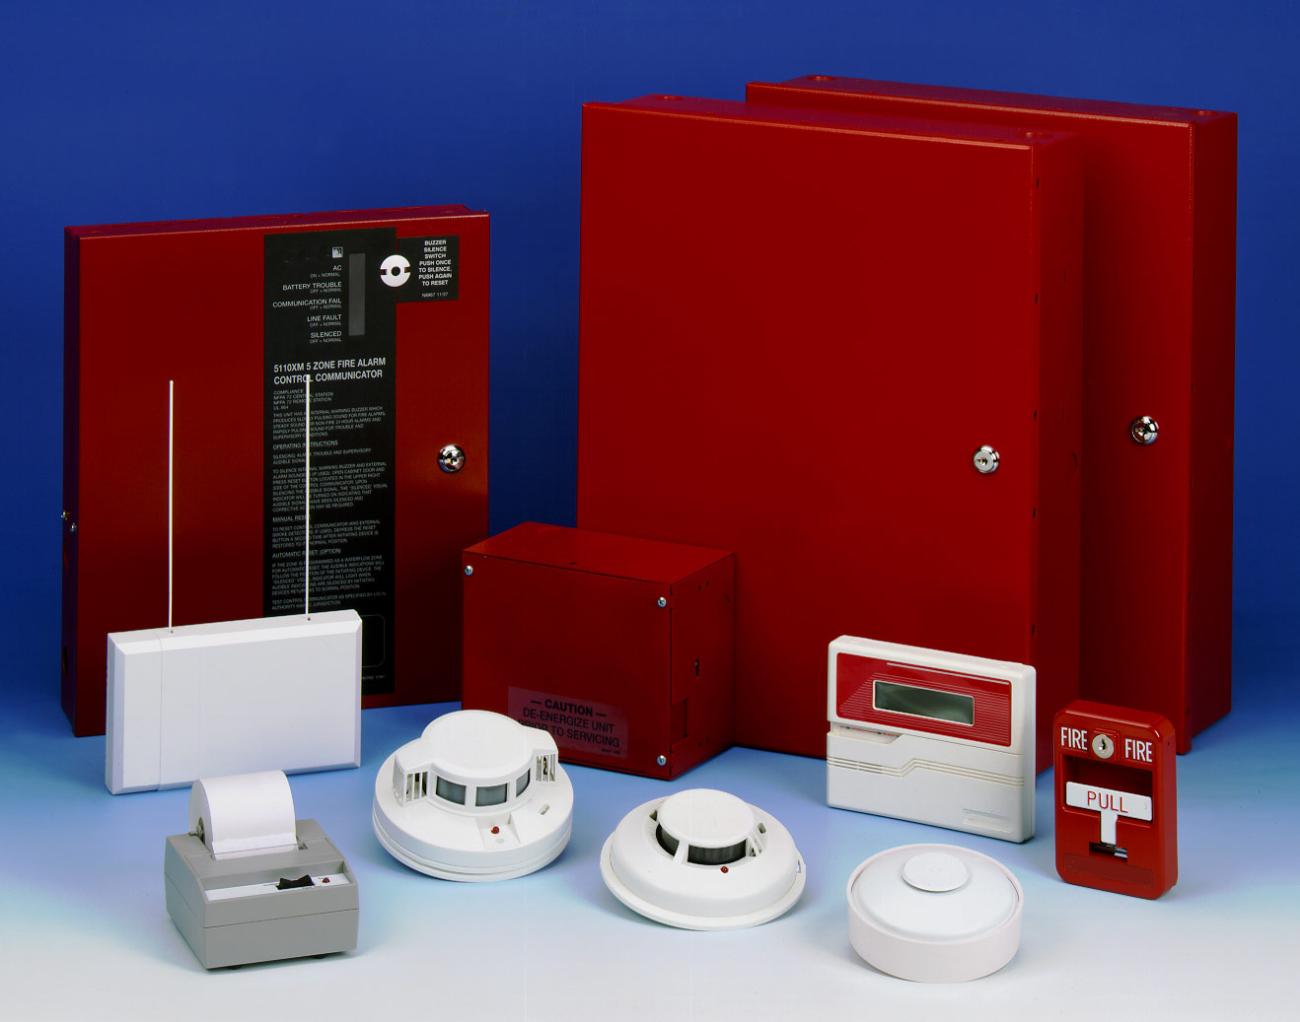 Fire Detection & Fire Alarm Systems